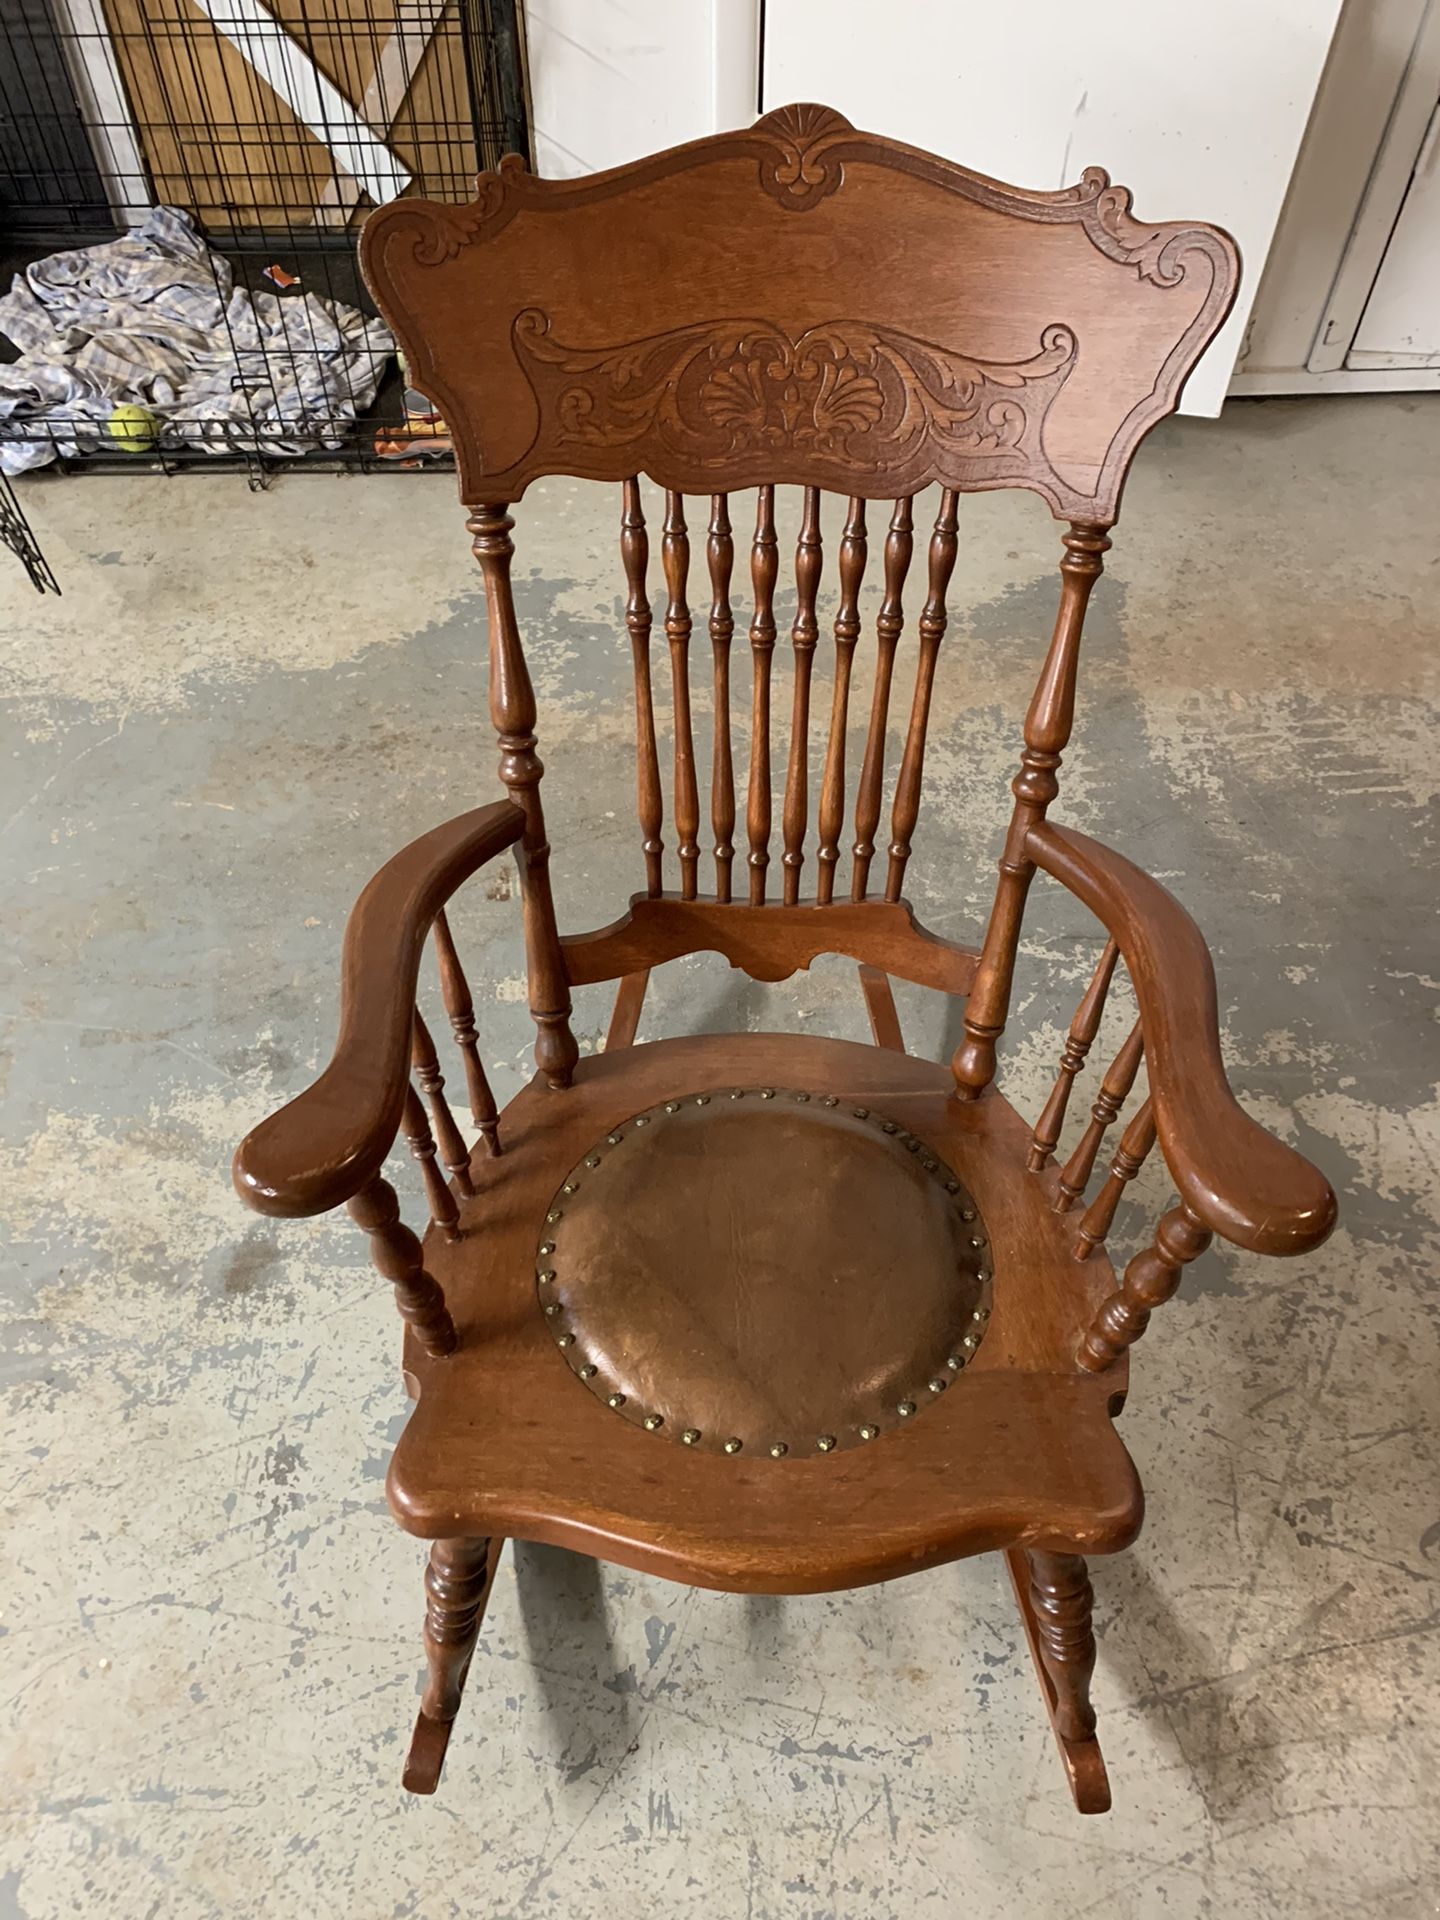 Handcrafted rocking chair with leather and burlap seat